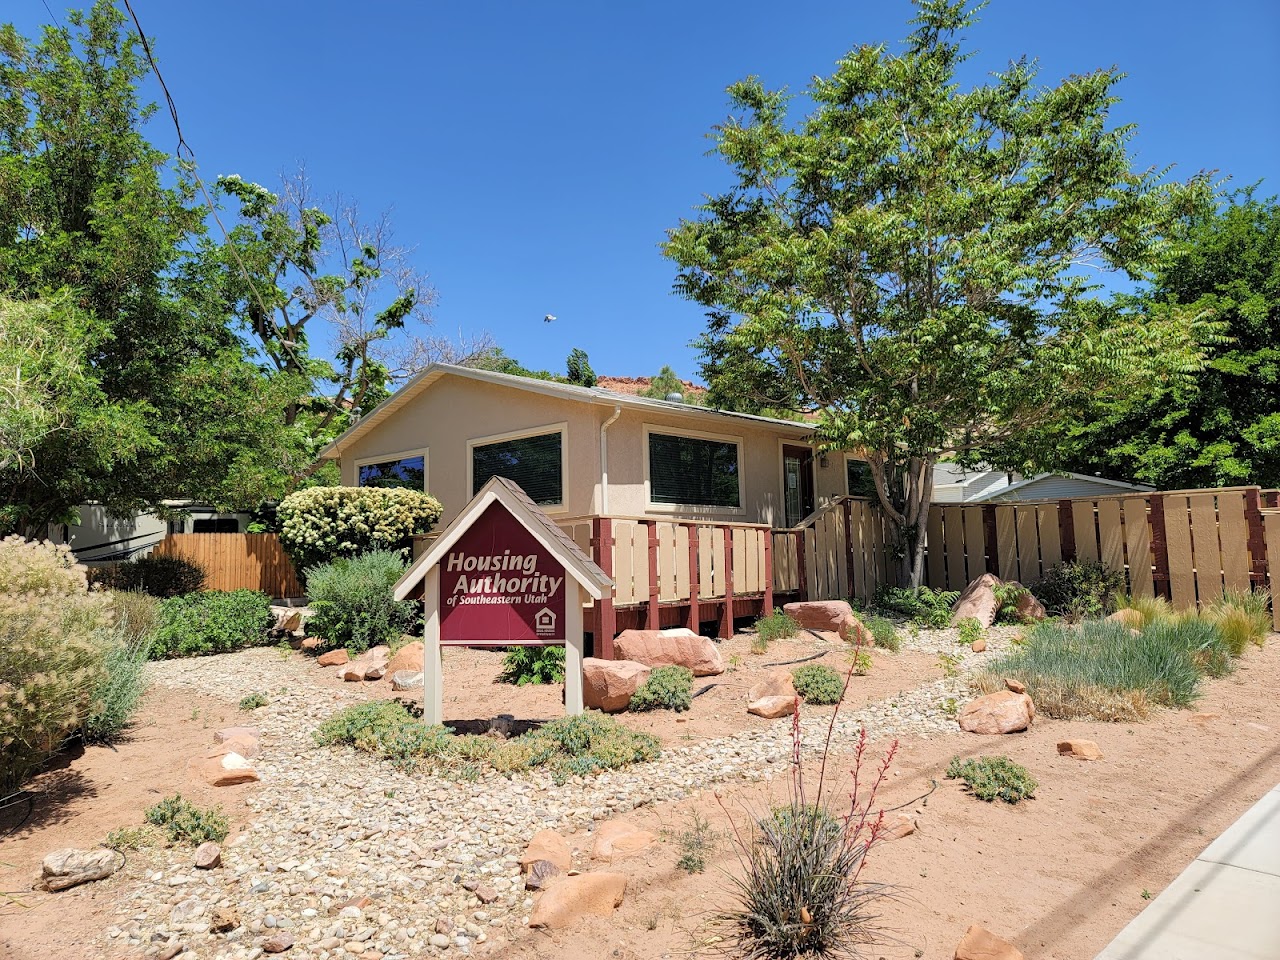 Photo of Housing Authority of Southeastern Utah. Affordable housing located at 321 East Center MOAB, UT 84532